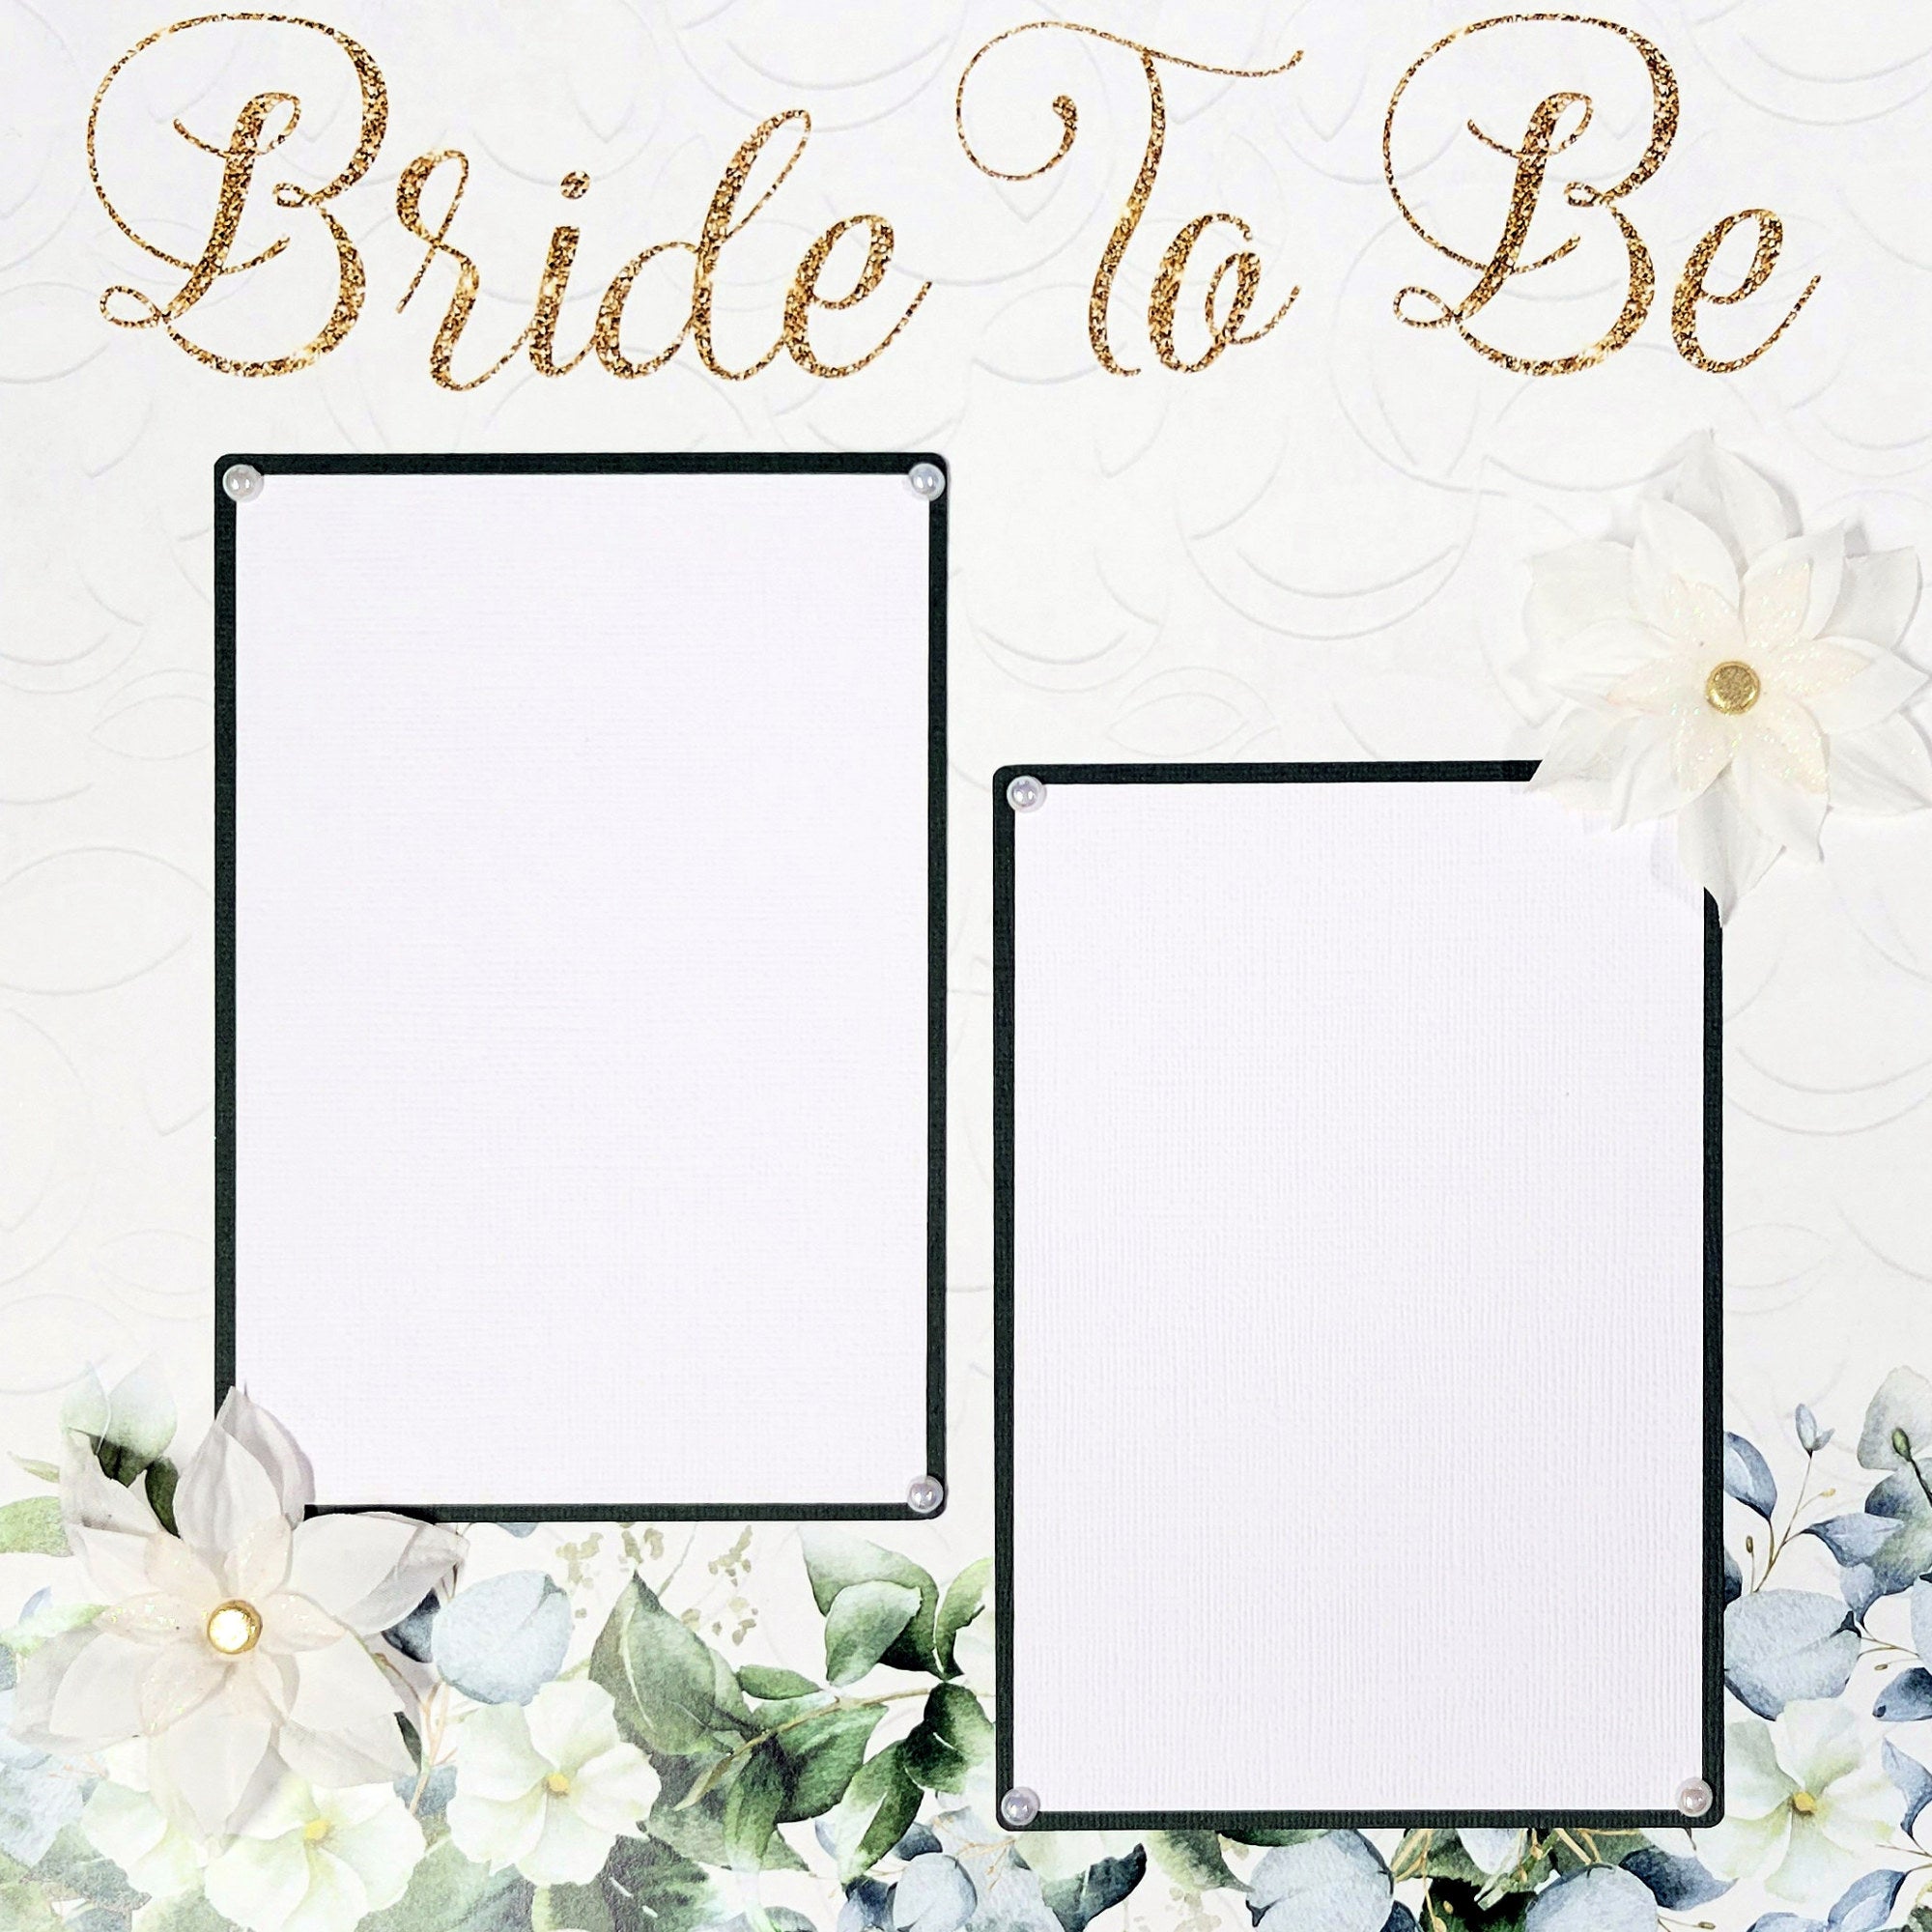 Bride To Be & Wedding Party (2) - 12 x 12 Pages, Fully-Assembled & Hand-Crafted 3D Scrapbook Premade by SSC Designs